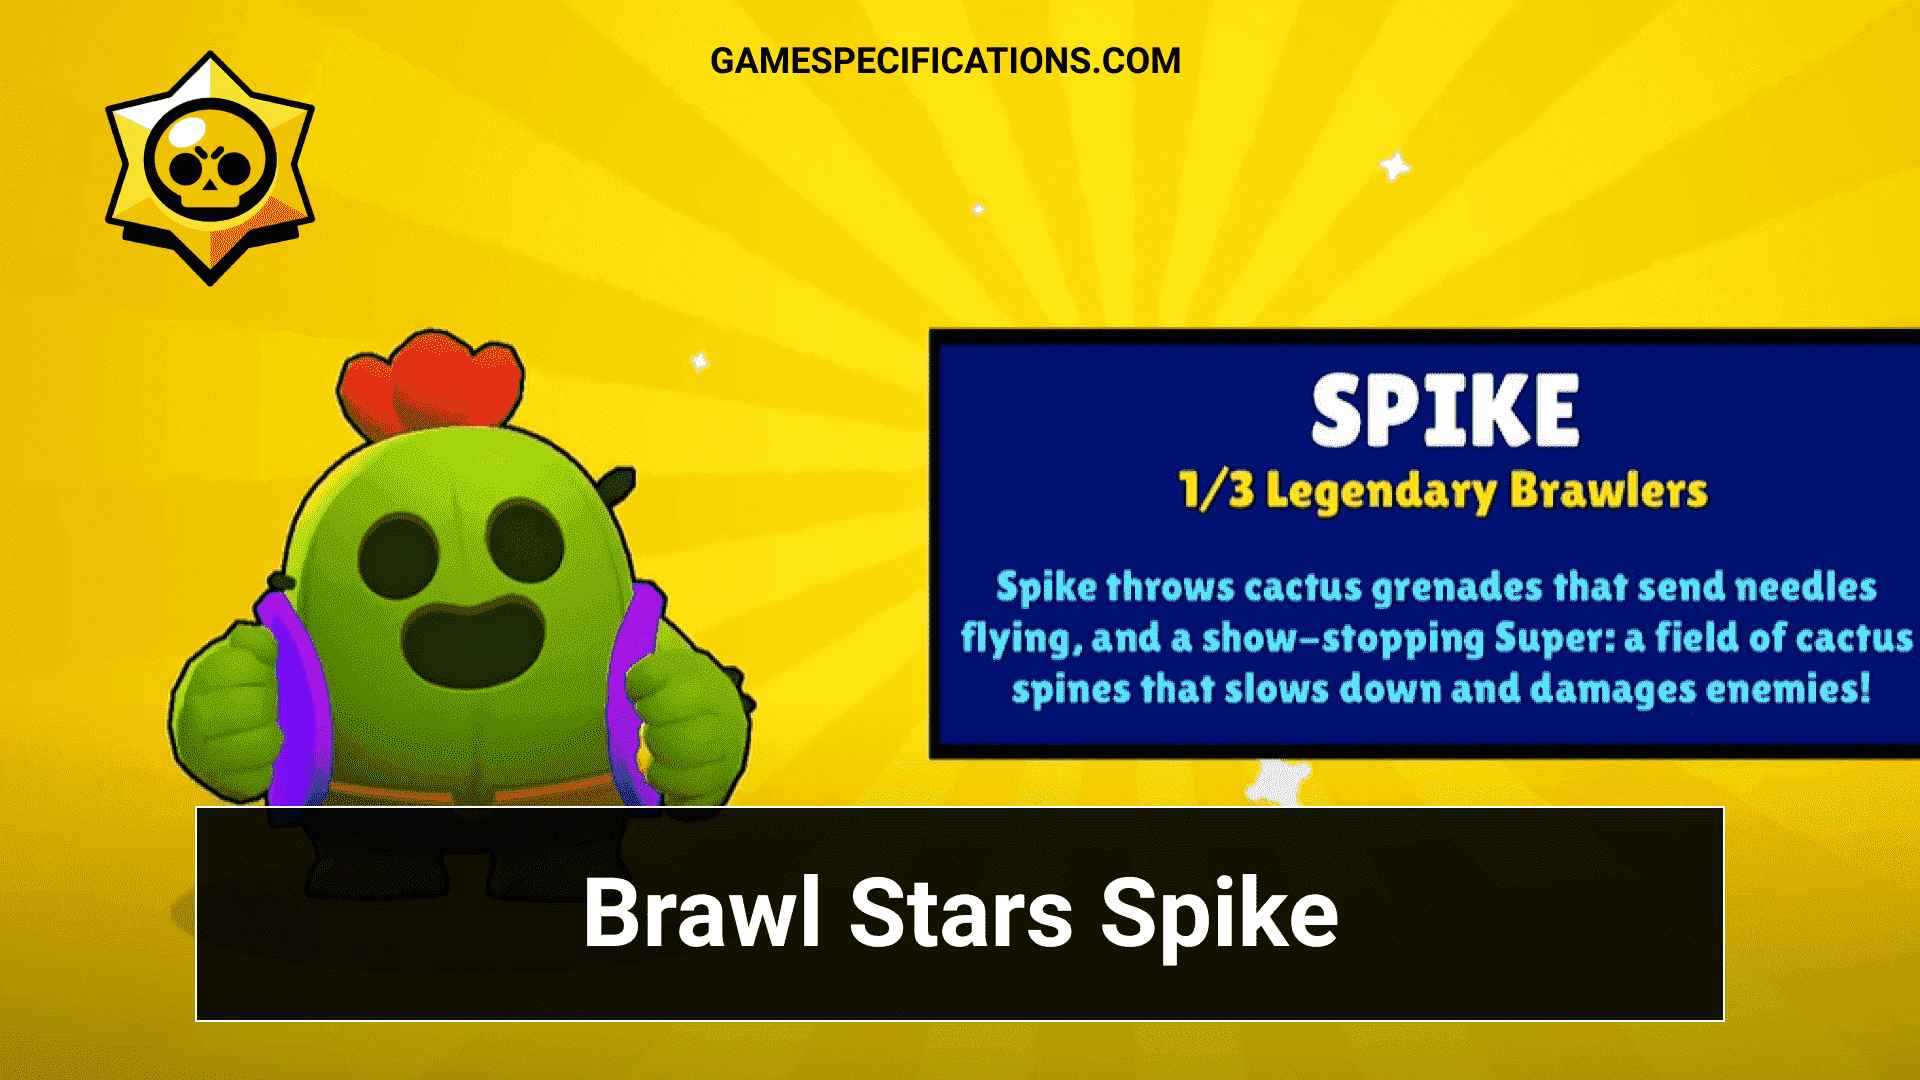 Brawl Stars Spike Introducing The Legendary Character In The Game Game Specifications - 3 legends brawl star